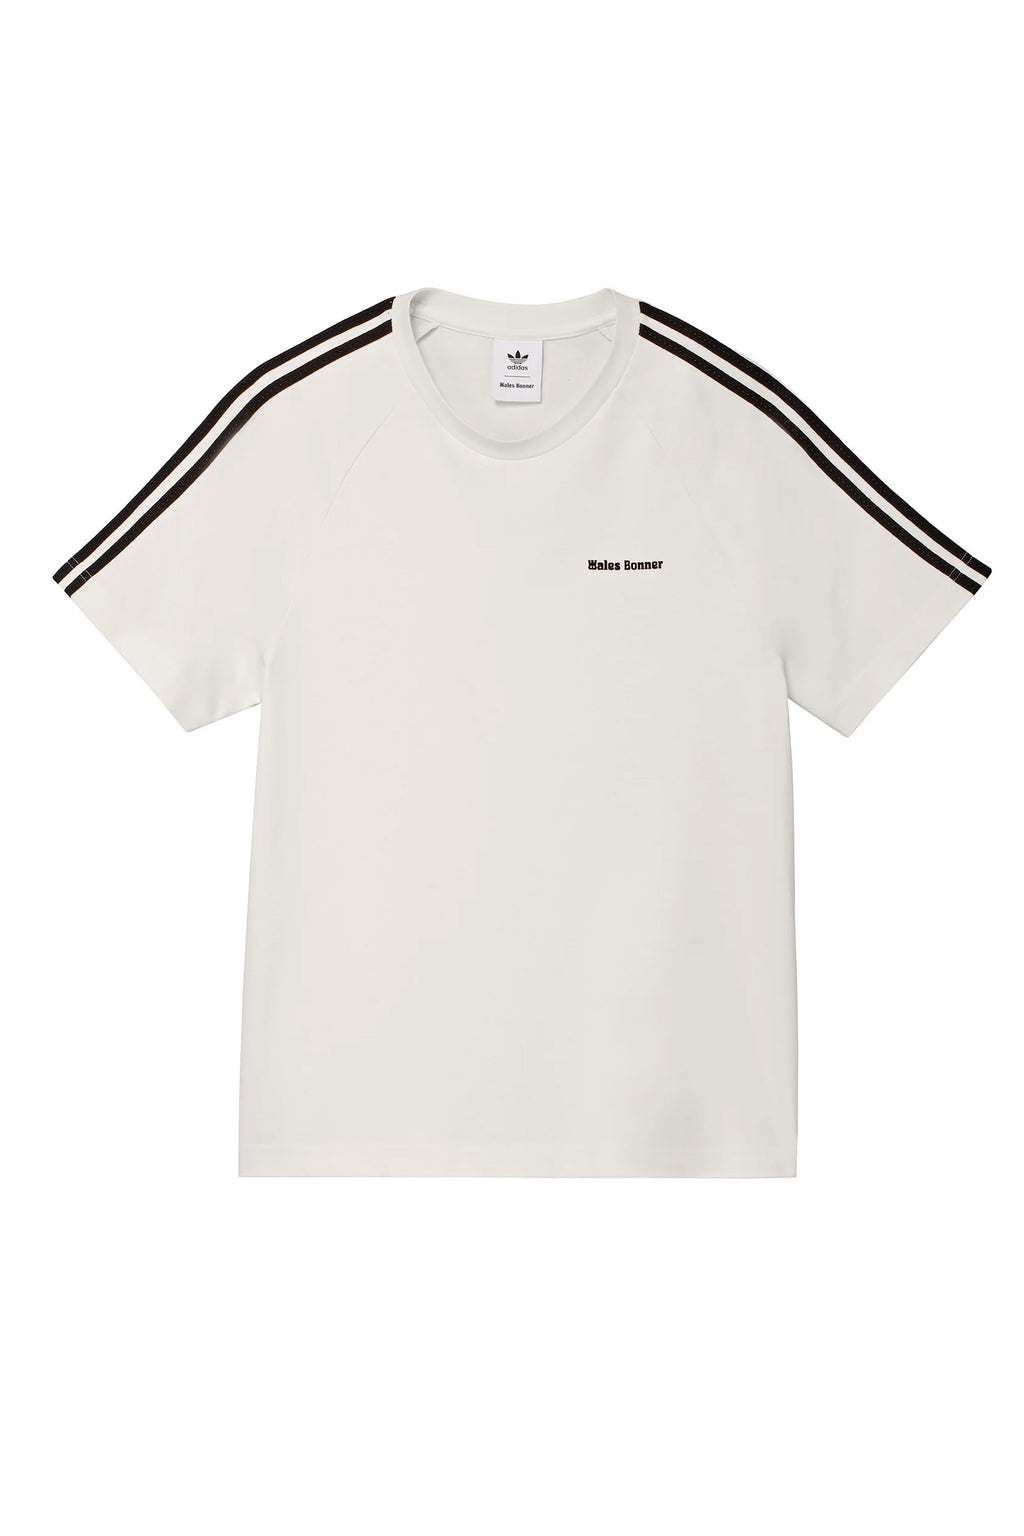 ADIDAS ORIGINALS BY WALES BONNER FW23 WB S/S TEE / WHT - NUBIAN